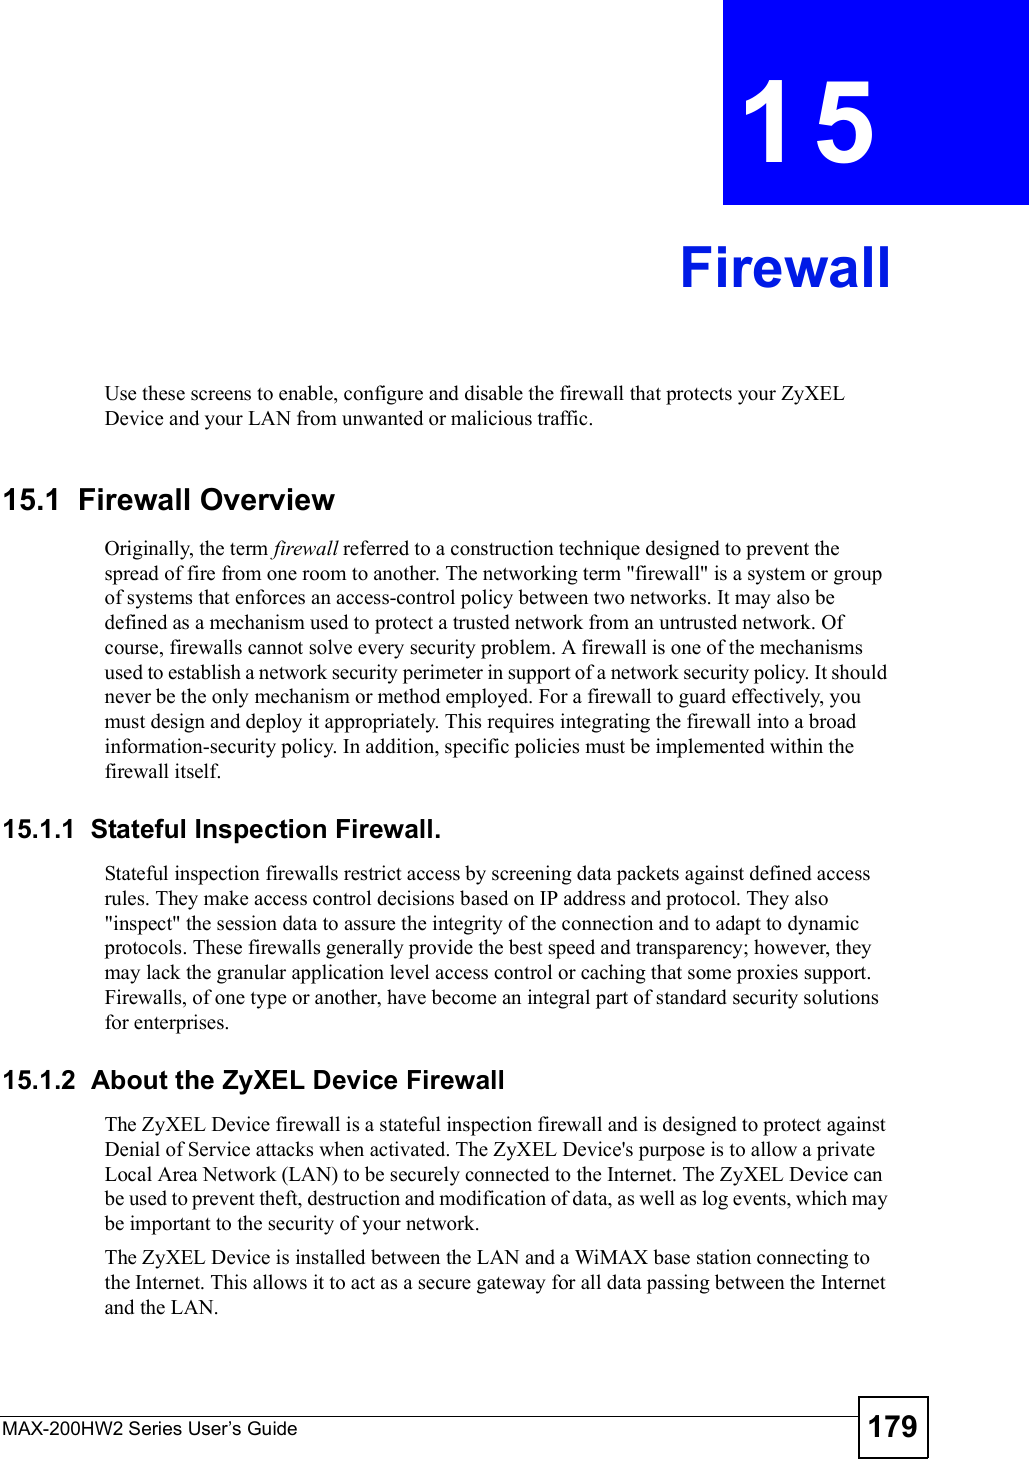 MAX-200HW2 Series User s Guide 179CHAPTER 15FirewallUse these screens to enable, configure and disable the firewall that protects your ZyXEL Device and your LAN from unwanted or malicious traffic.15.1  Firewall OverviewOriginally, the term firewall referred to a construction technique designed to prevent the spread of fire from one room to another. The networking term &quot;firewall&quot; is a system or group of systems that enforces an access-control policy between two networks. It may also be defined as a mechanism used to protect a trusted network from an untrusted network. Of course, firewalls cannot solve every security problem. A firewall is one of the mechanisms used to establish a network security perimeter in support of a network security policy. It should never be the only mechanism or method employed. For a firewall to guard effectively, you must design and deploy it appropriately. This requires integrating the firewall into a broad information-security policy. In addition, specific policies must be implemented within the firewall itself.15.1.1  Stateful Inspection Firewall. Stateful inspection firewalls restrict access by screening data packets against defined access rules. They make access control decisions based on IP address and protocol. They also &quot;inspect&quot; the session data to assure the integrity of the connection and to adapt to dynamic protocols. These firewalls generally provide the best speed and transparency; however, they may lack the granular application level access control or caching that some proxies support. Firewalls, of one type or another, have become an integral part of standard security solutions for enterprises.15.1.2  About the ZyXEL Device FirewallThe ZyXEL Device firewall is a stateful inspection firewall and is designed to protect against Denial of Service attacks when activated. The ZyXEL Device&apos;s purpose is to allow a private Local Area Network (LAN) to be securely connected to the Internet. The ZyXEL Device can be used to prevent theft, destruction and modification of data, as well as log events, which may be important to the security of your network. The ZyXEL Device is installed between the LAN and a WiMAX base station connecting to the Internet. This allows it to act as a secure gateway for all data passing between the Internet and the LAN.